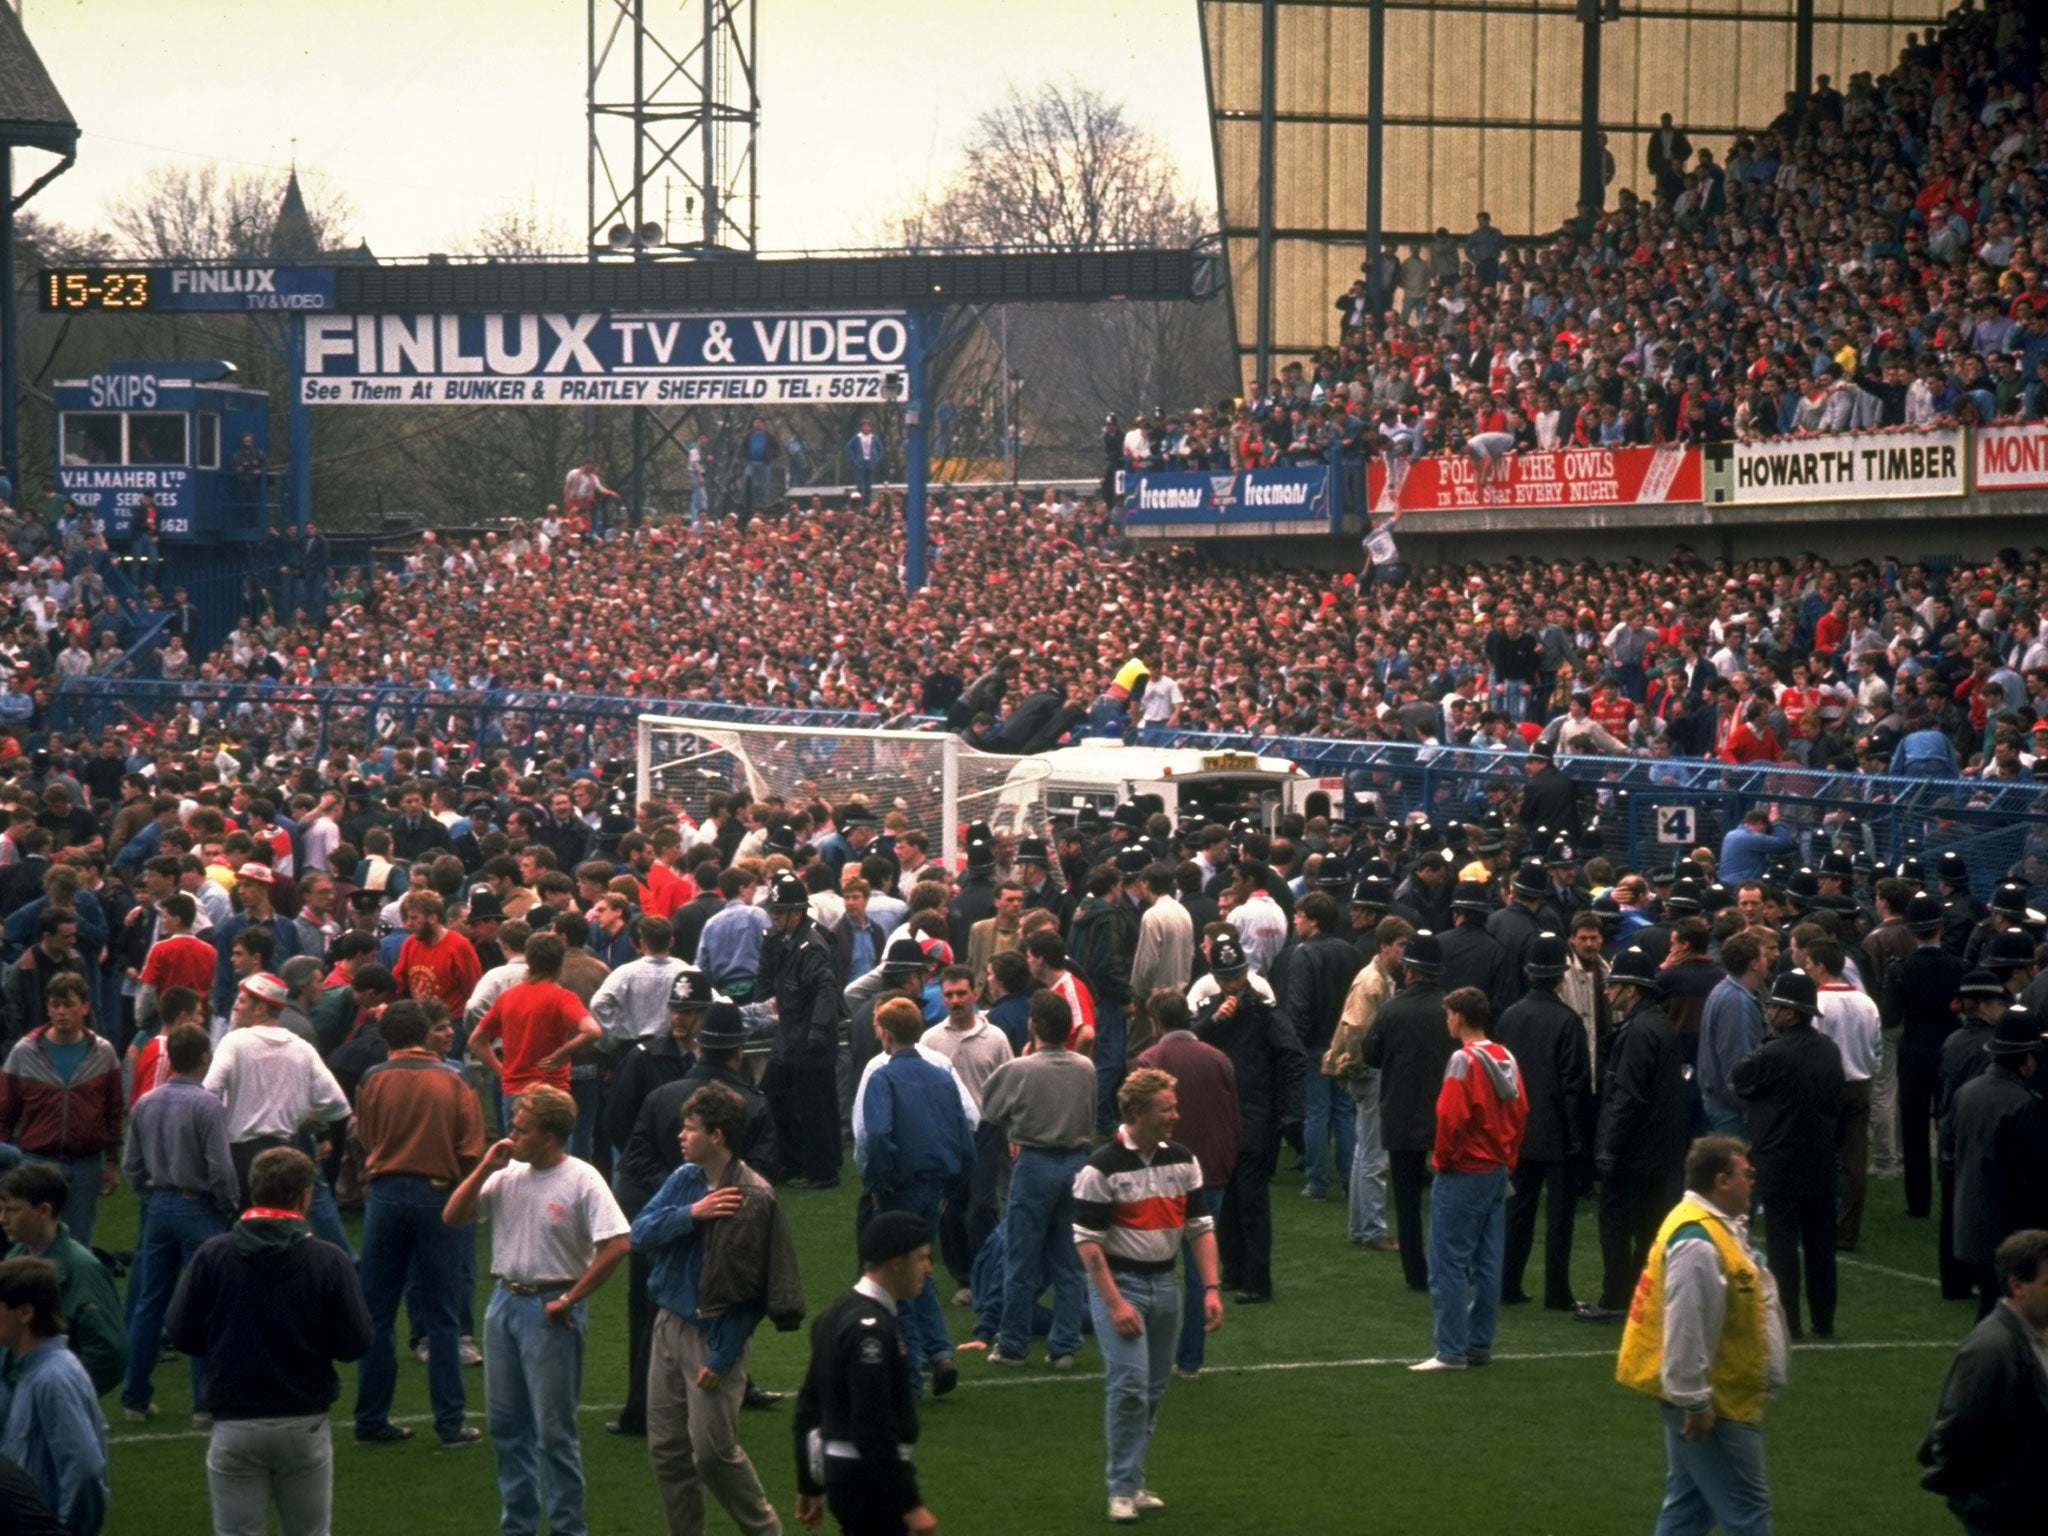 Supporters are crushed against the barrier as disaster strikes before the FA Cup semi-final match between Liverpool and Nottingham Forest - police footage of the day contains a 10-minute gap in one of the tapes